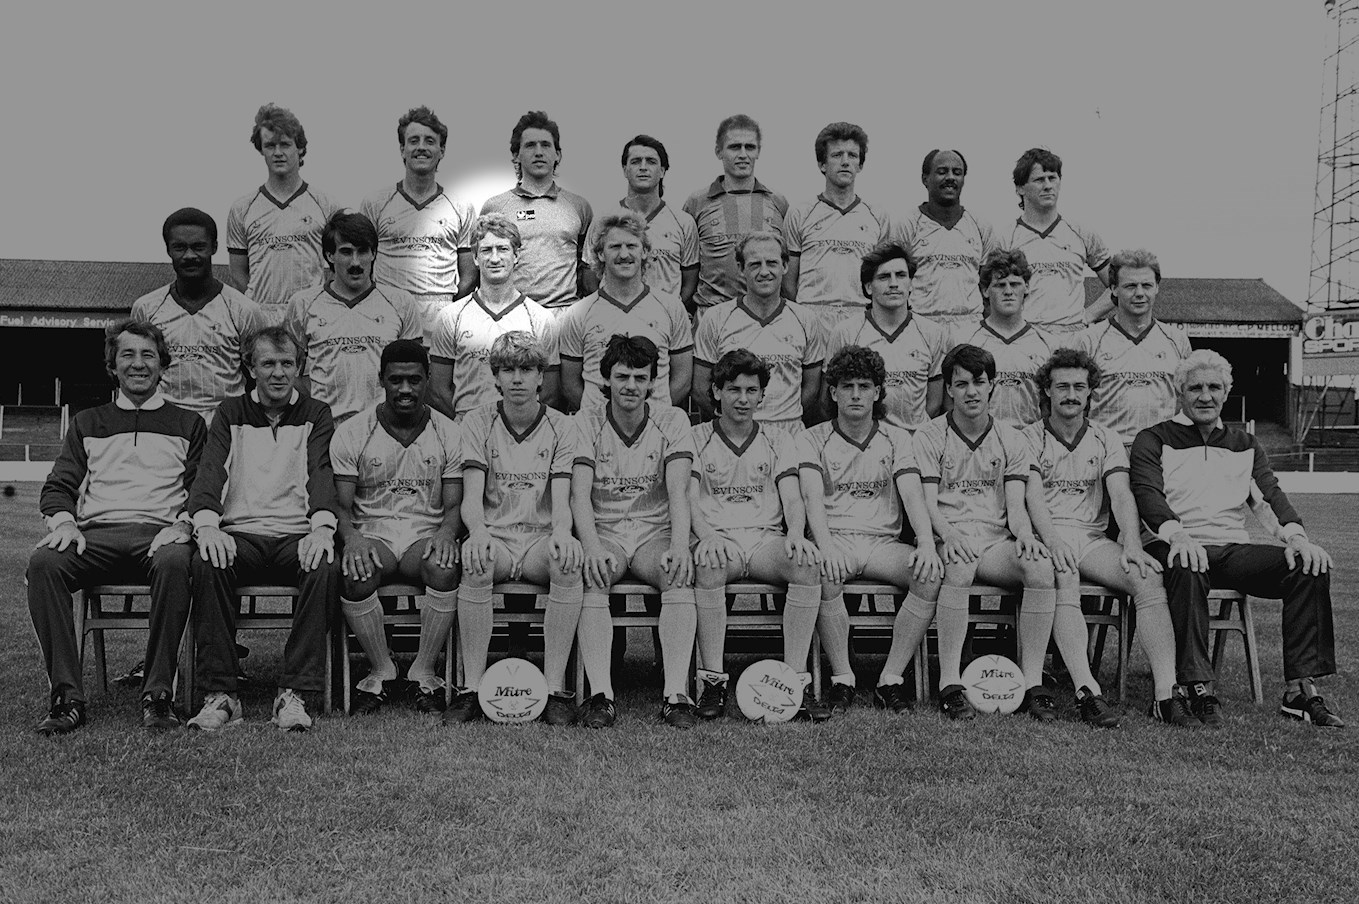 Mick Vinter, pictured here from the 1985-86 squad photo, can be seen on the middle row, third from the left